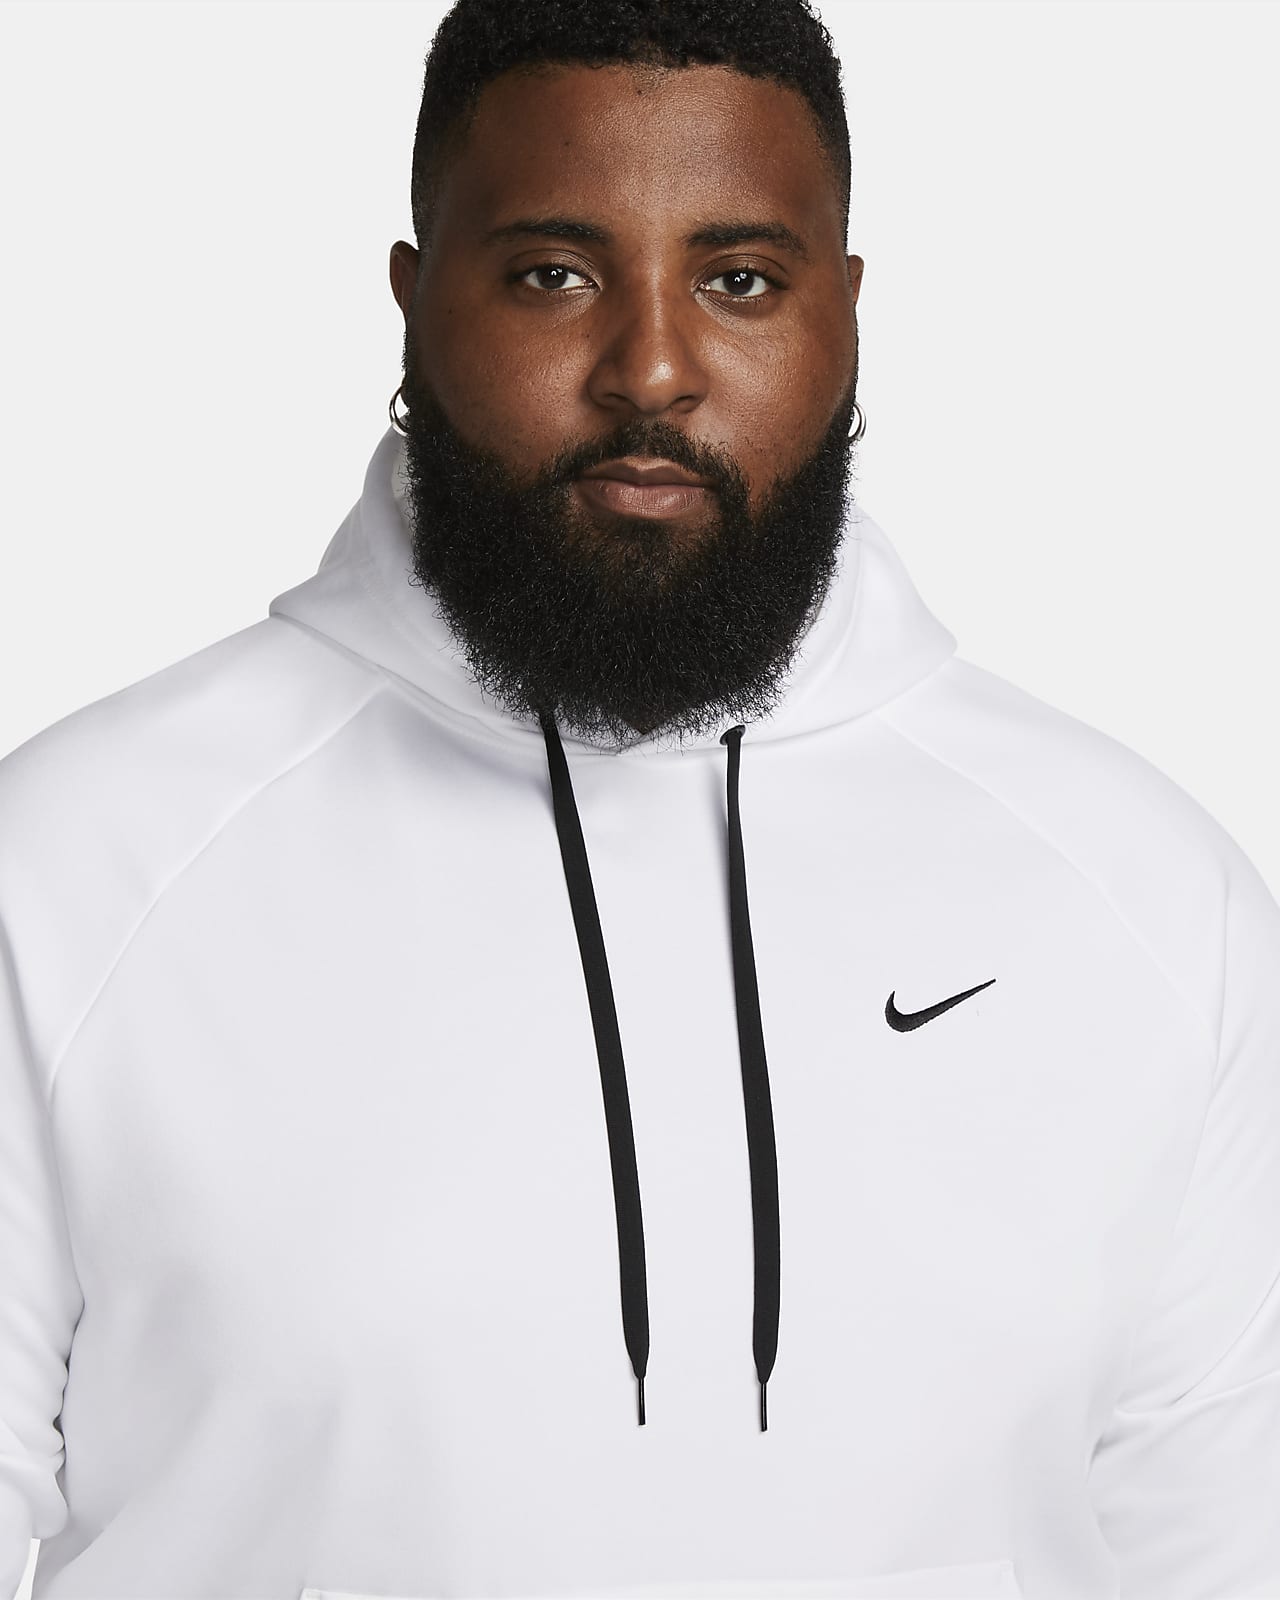 MEN'S NIKE THERMA PULLOVER HOODIE (ANTHRACITE/WHITE, Small) at  Men's  Clothing store